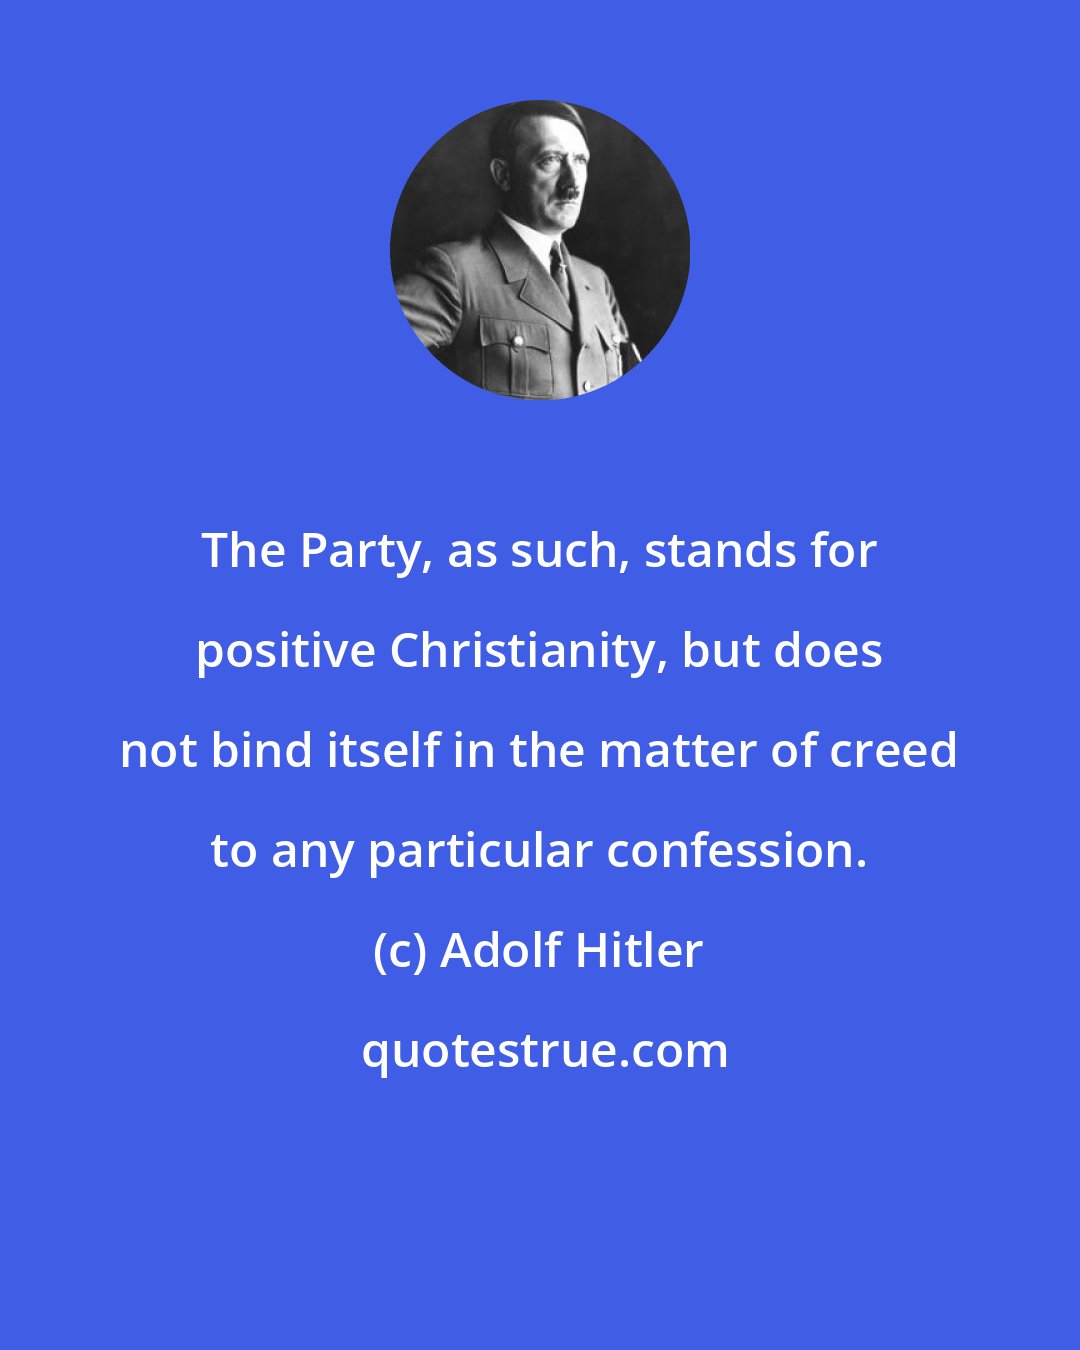 Adolf Hitler: The Party, as such, stands for positive Christianity, but does not bind itself in the matter of creed to any particular confession.